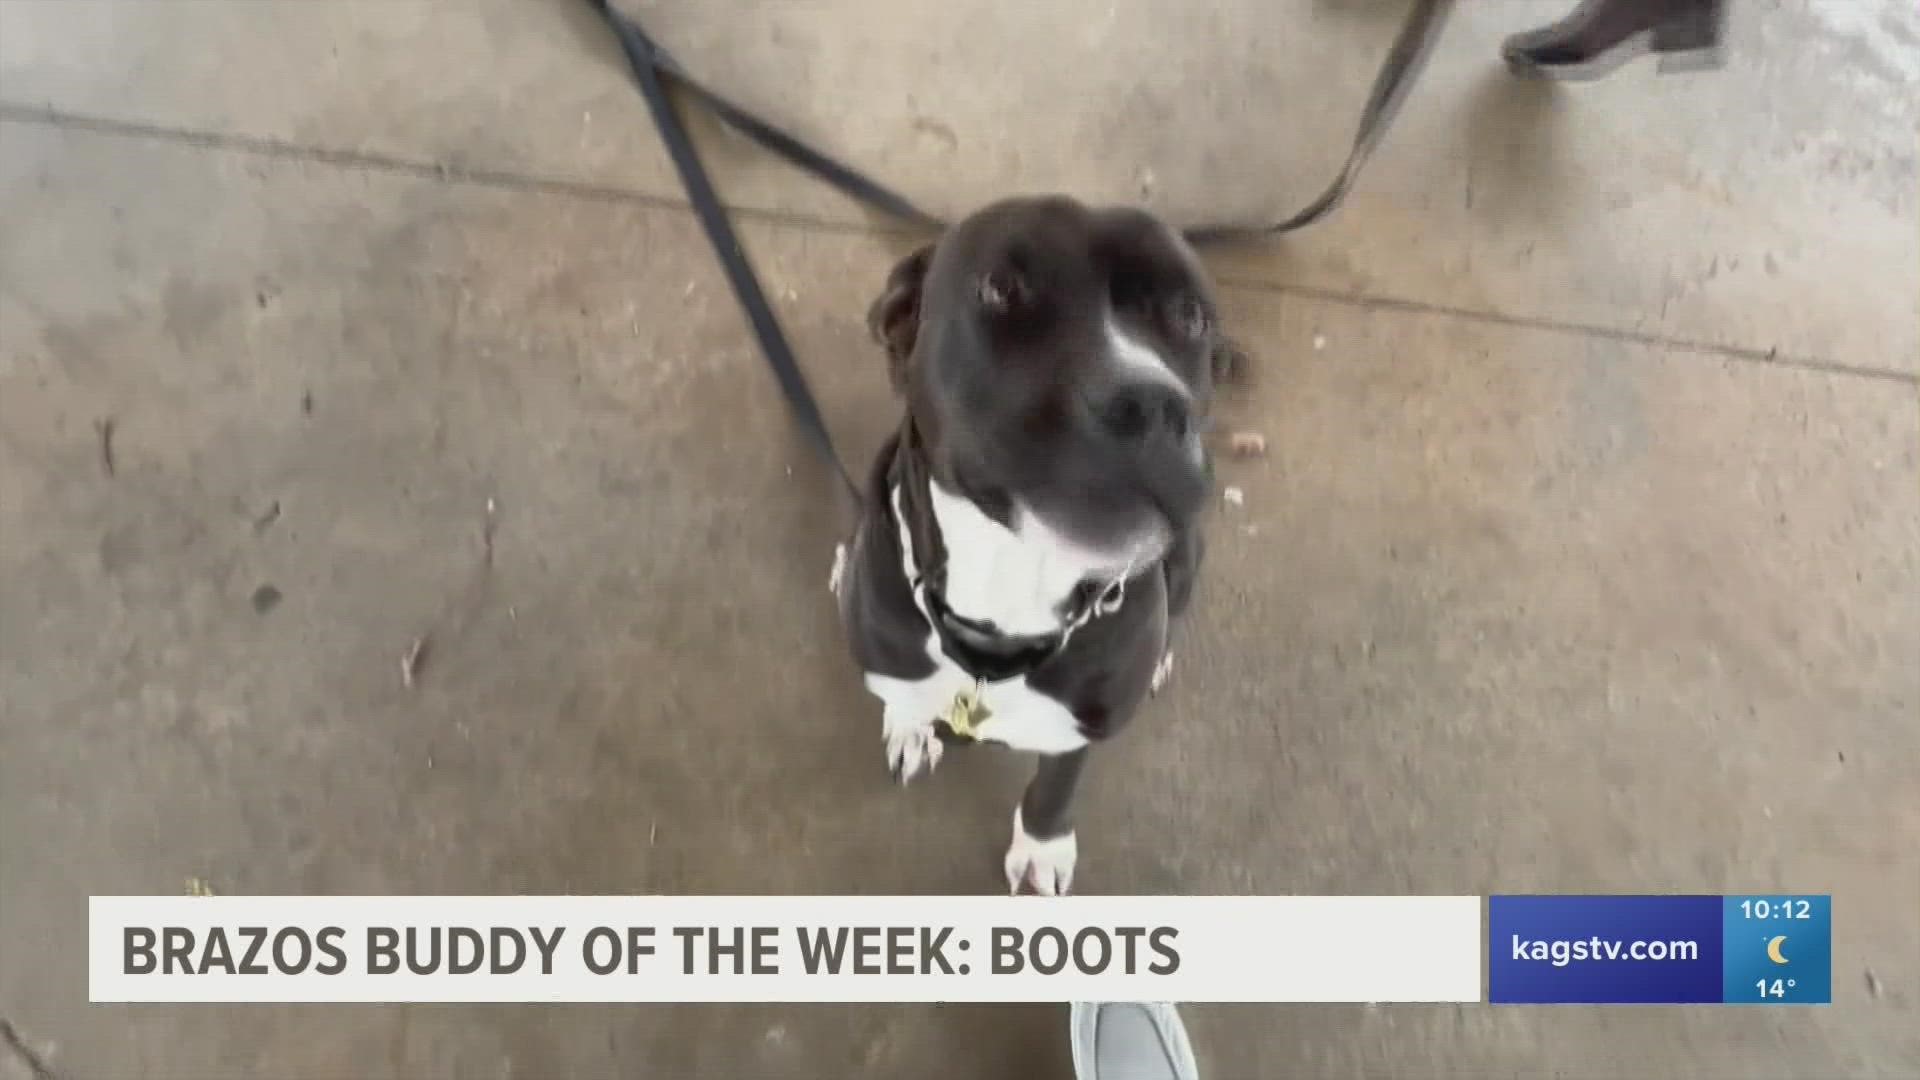 This week's featured Brazos Buddy is Boots, a two-year-old mixed breed dog that's looking to be adopted.